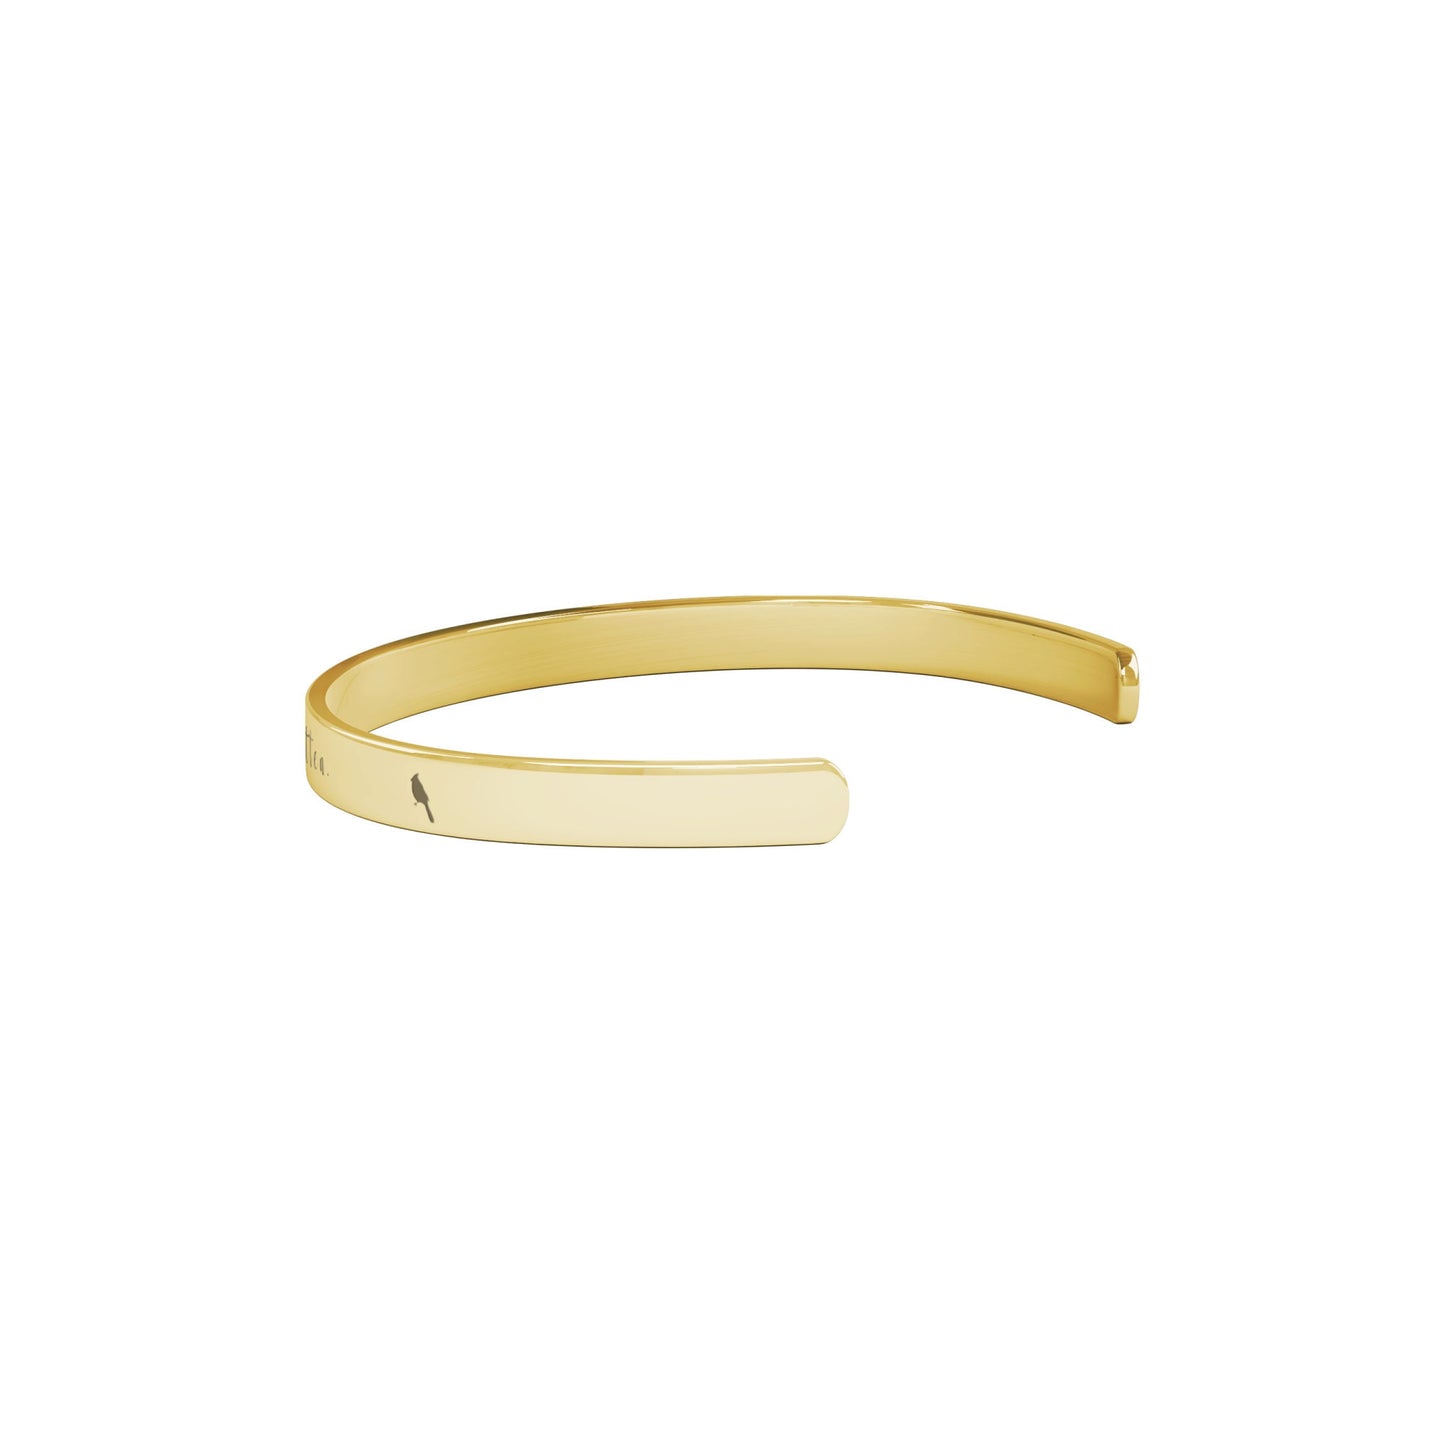 Comforting Sympathy Gift: Gold Cuff Bracelet for Remembering a Loved One